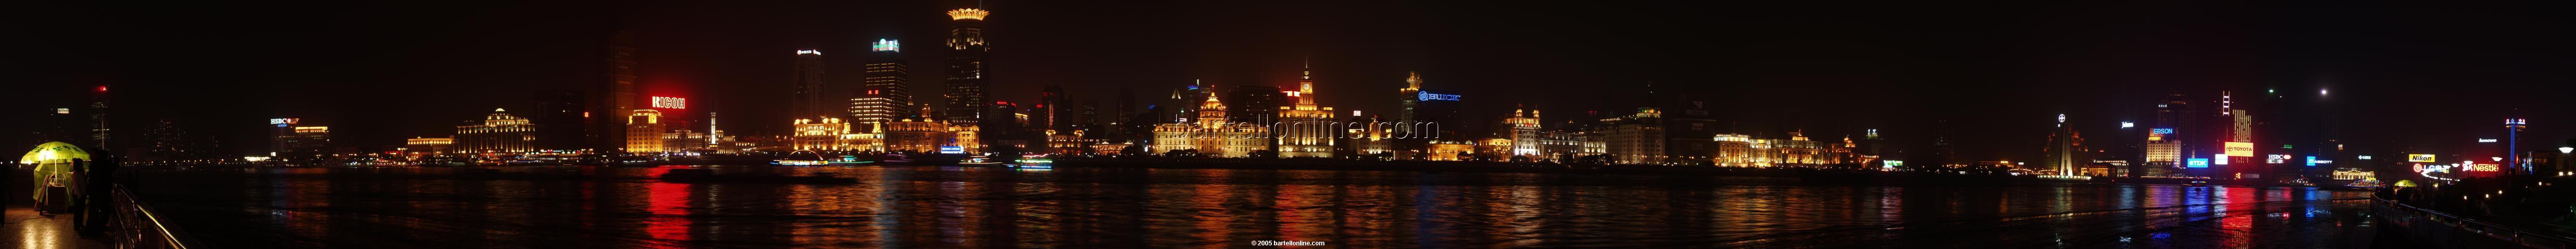 Night panorama of The Bund in Shanghai, China as seen from across the river in Pudong